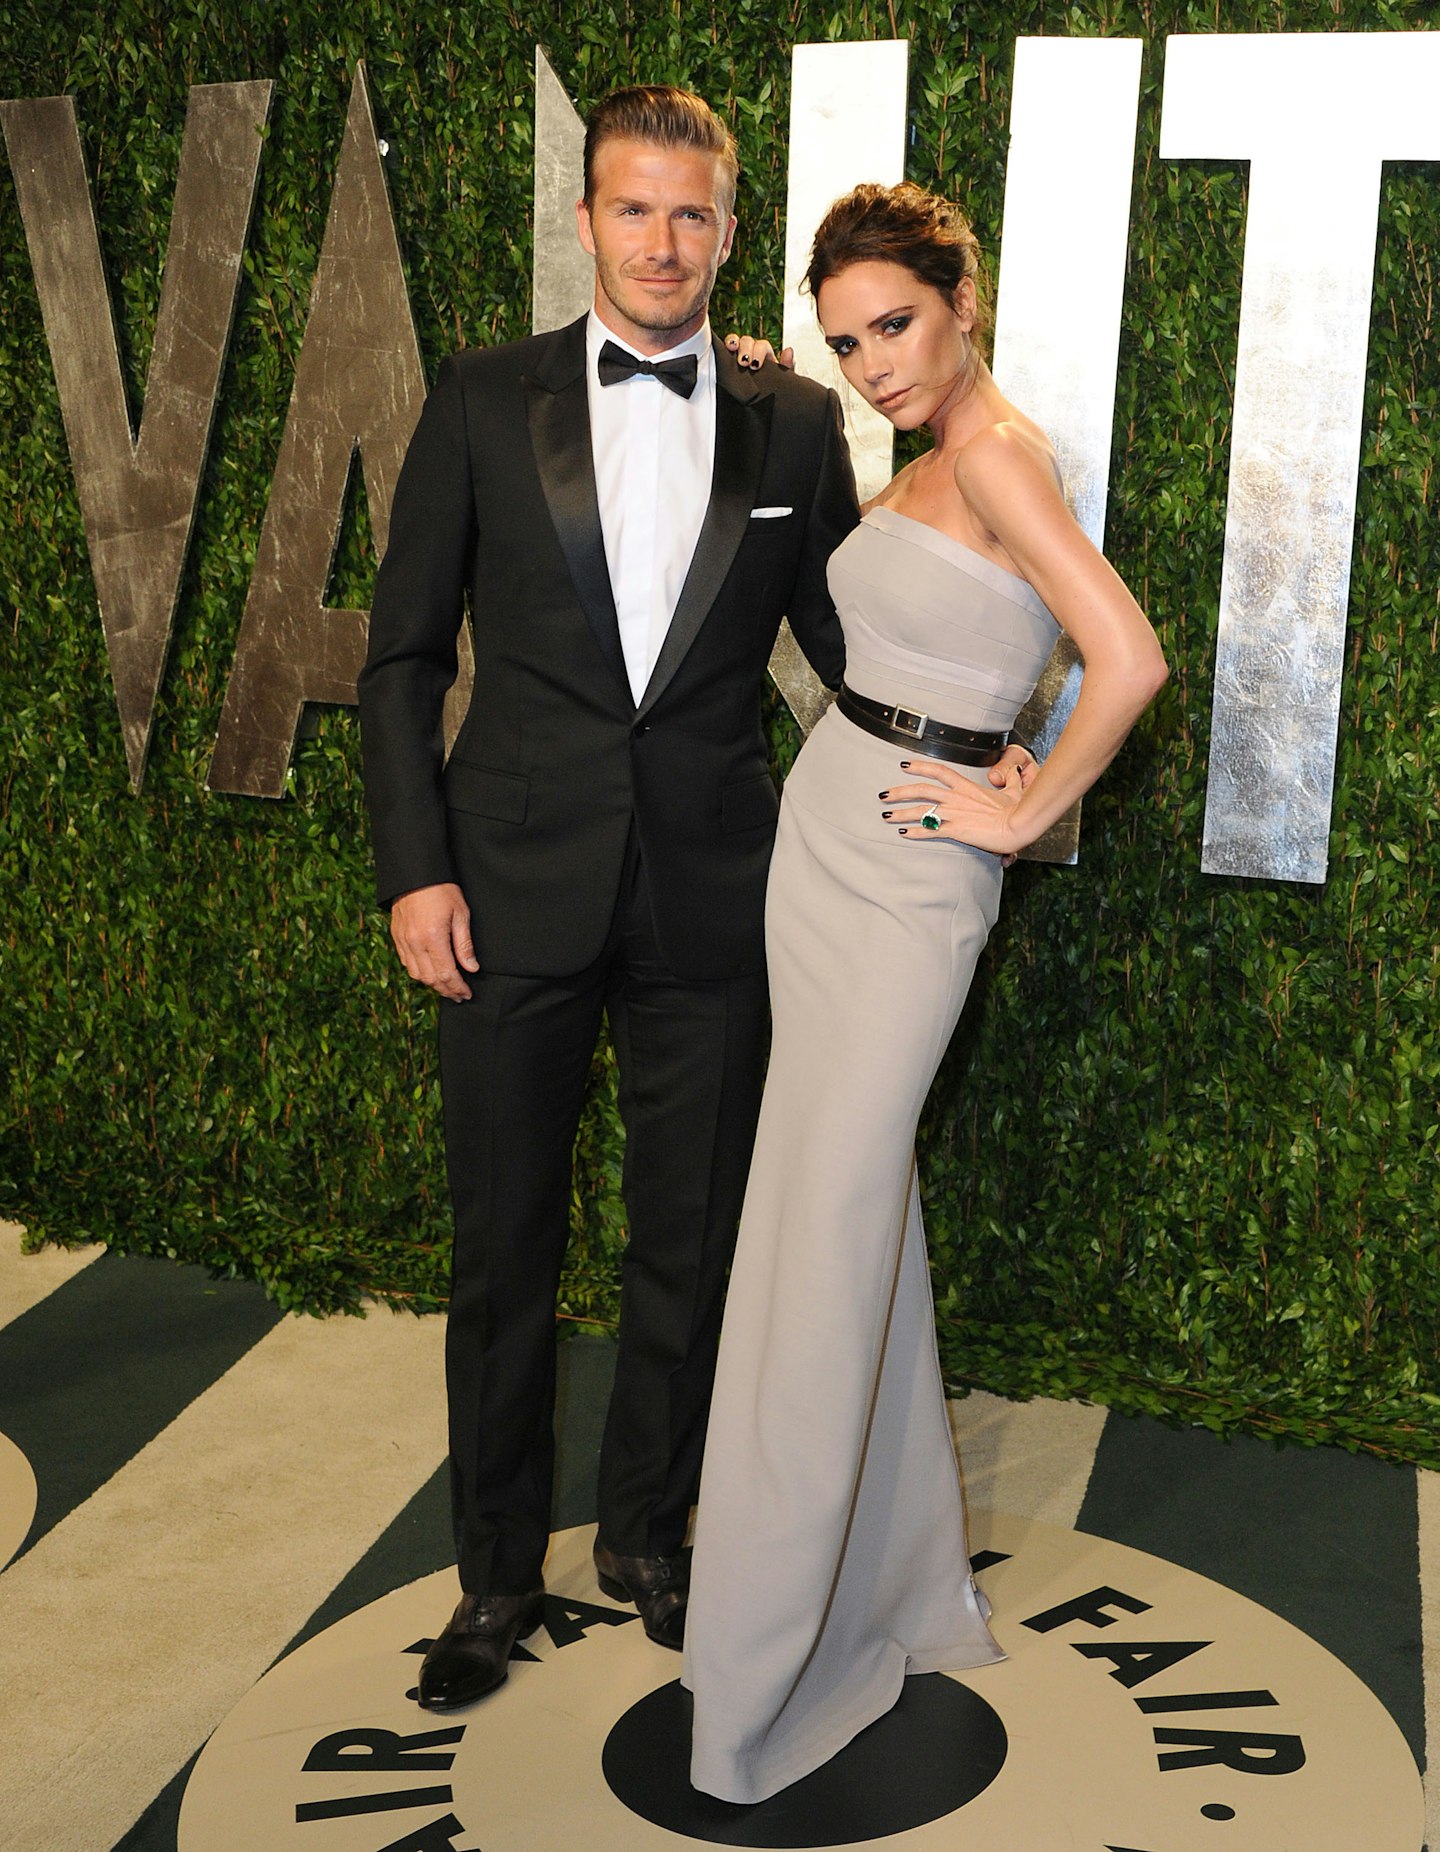 David Beckham and Victoria Beckham attend the 2012 Vanity Fair Oscar Party at Sunset Tower on February 26, 2012 in West Hollywood